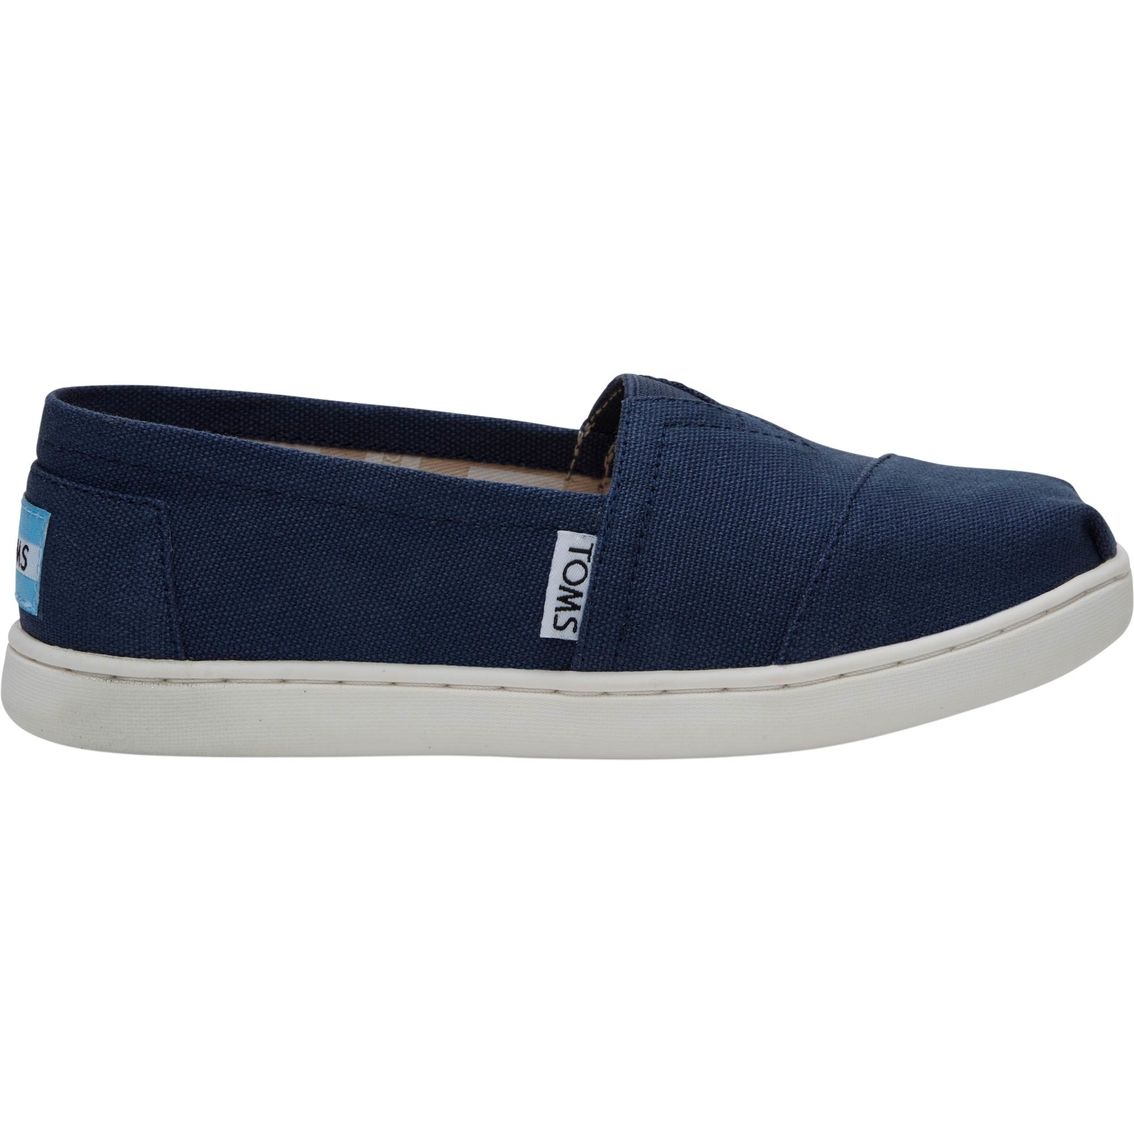 Toms Girls Canvas Classic Shoes | Sneakers | Shoes | Shop The Exchange